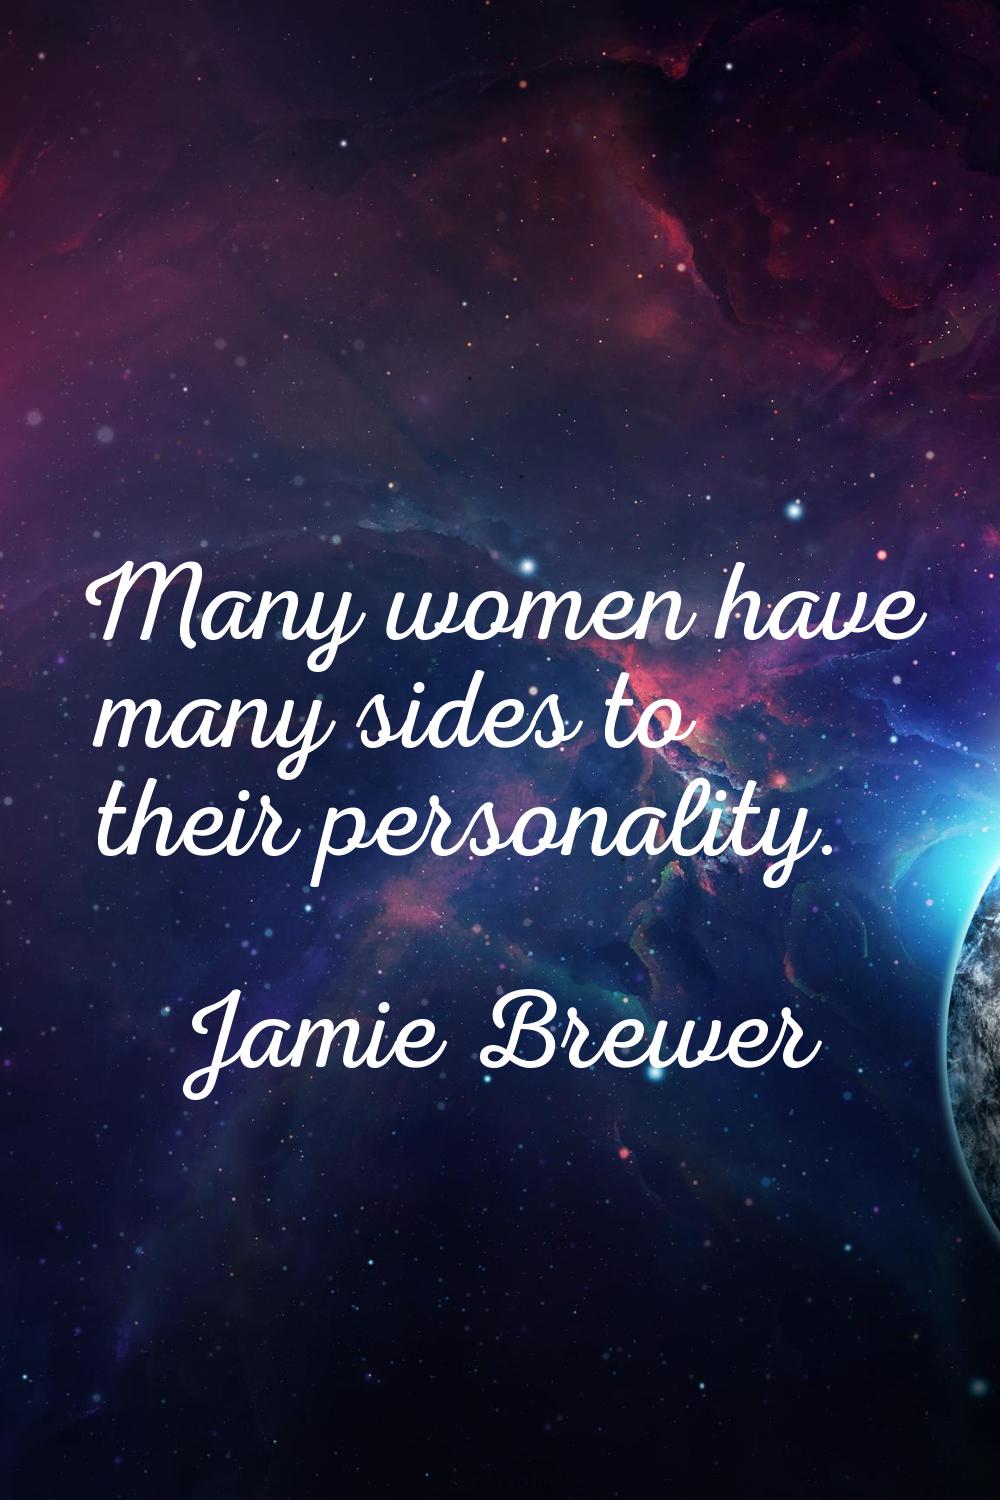 Many women have many sides to their personality.